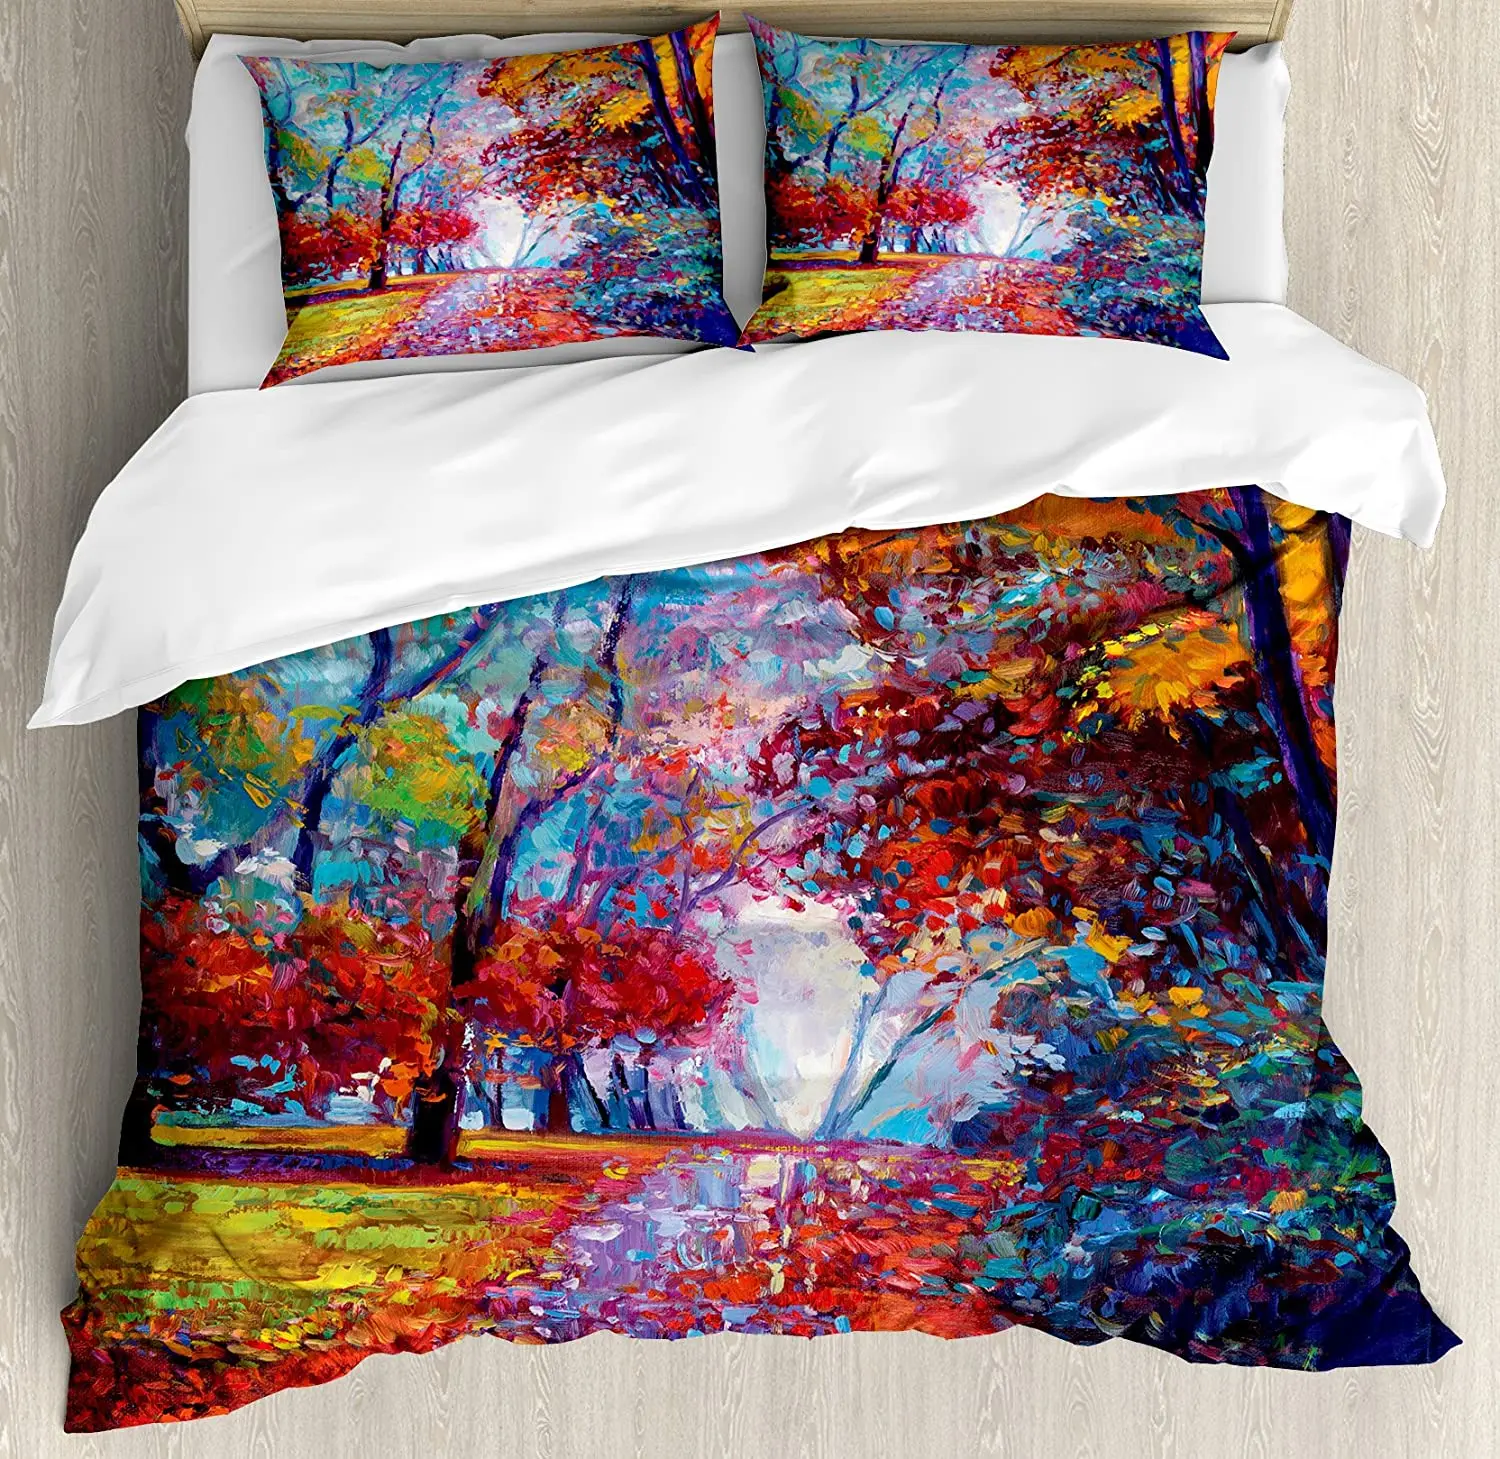 

Country Bedding Set Comforter Duvet Cover Pillow Shams Colorful Fairy Paint of Park in Fall Arts Vi Bedding Cover Double Bed Set